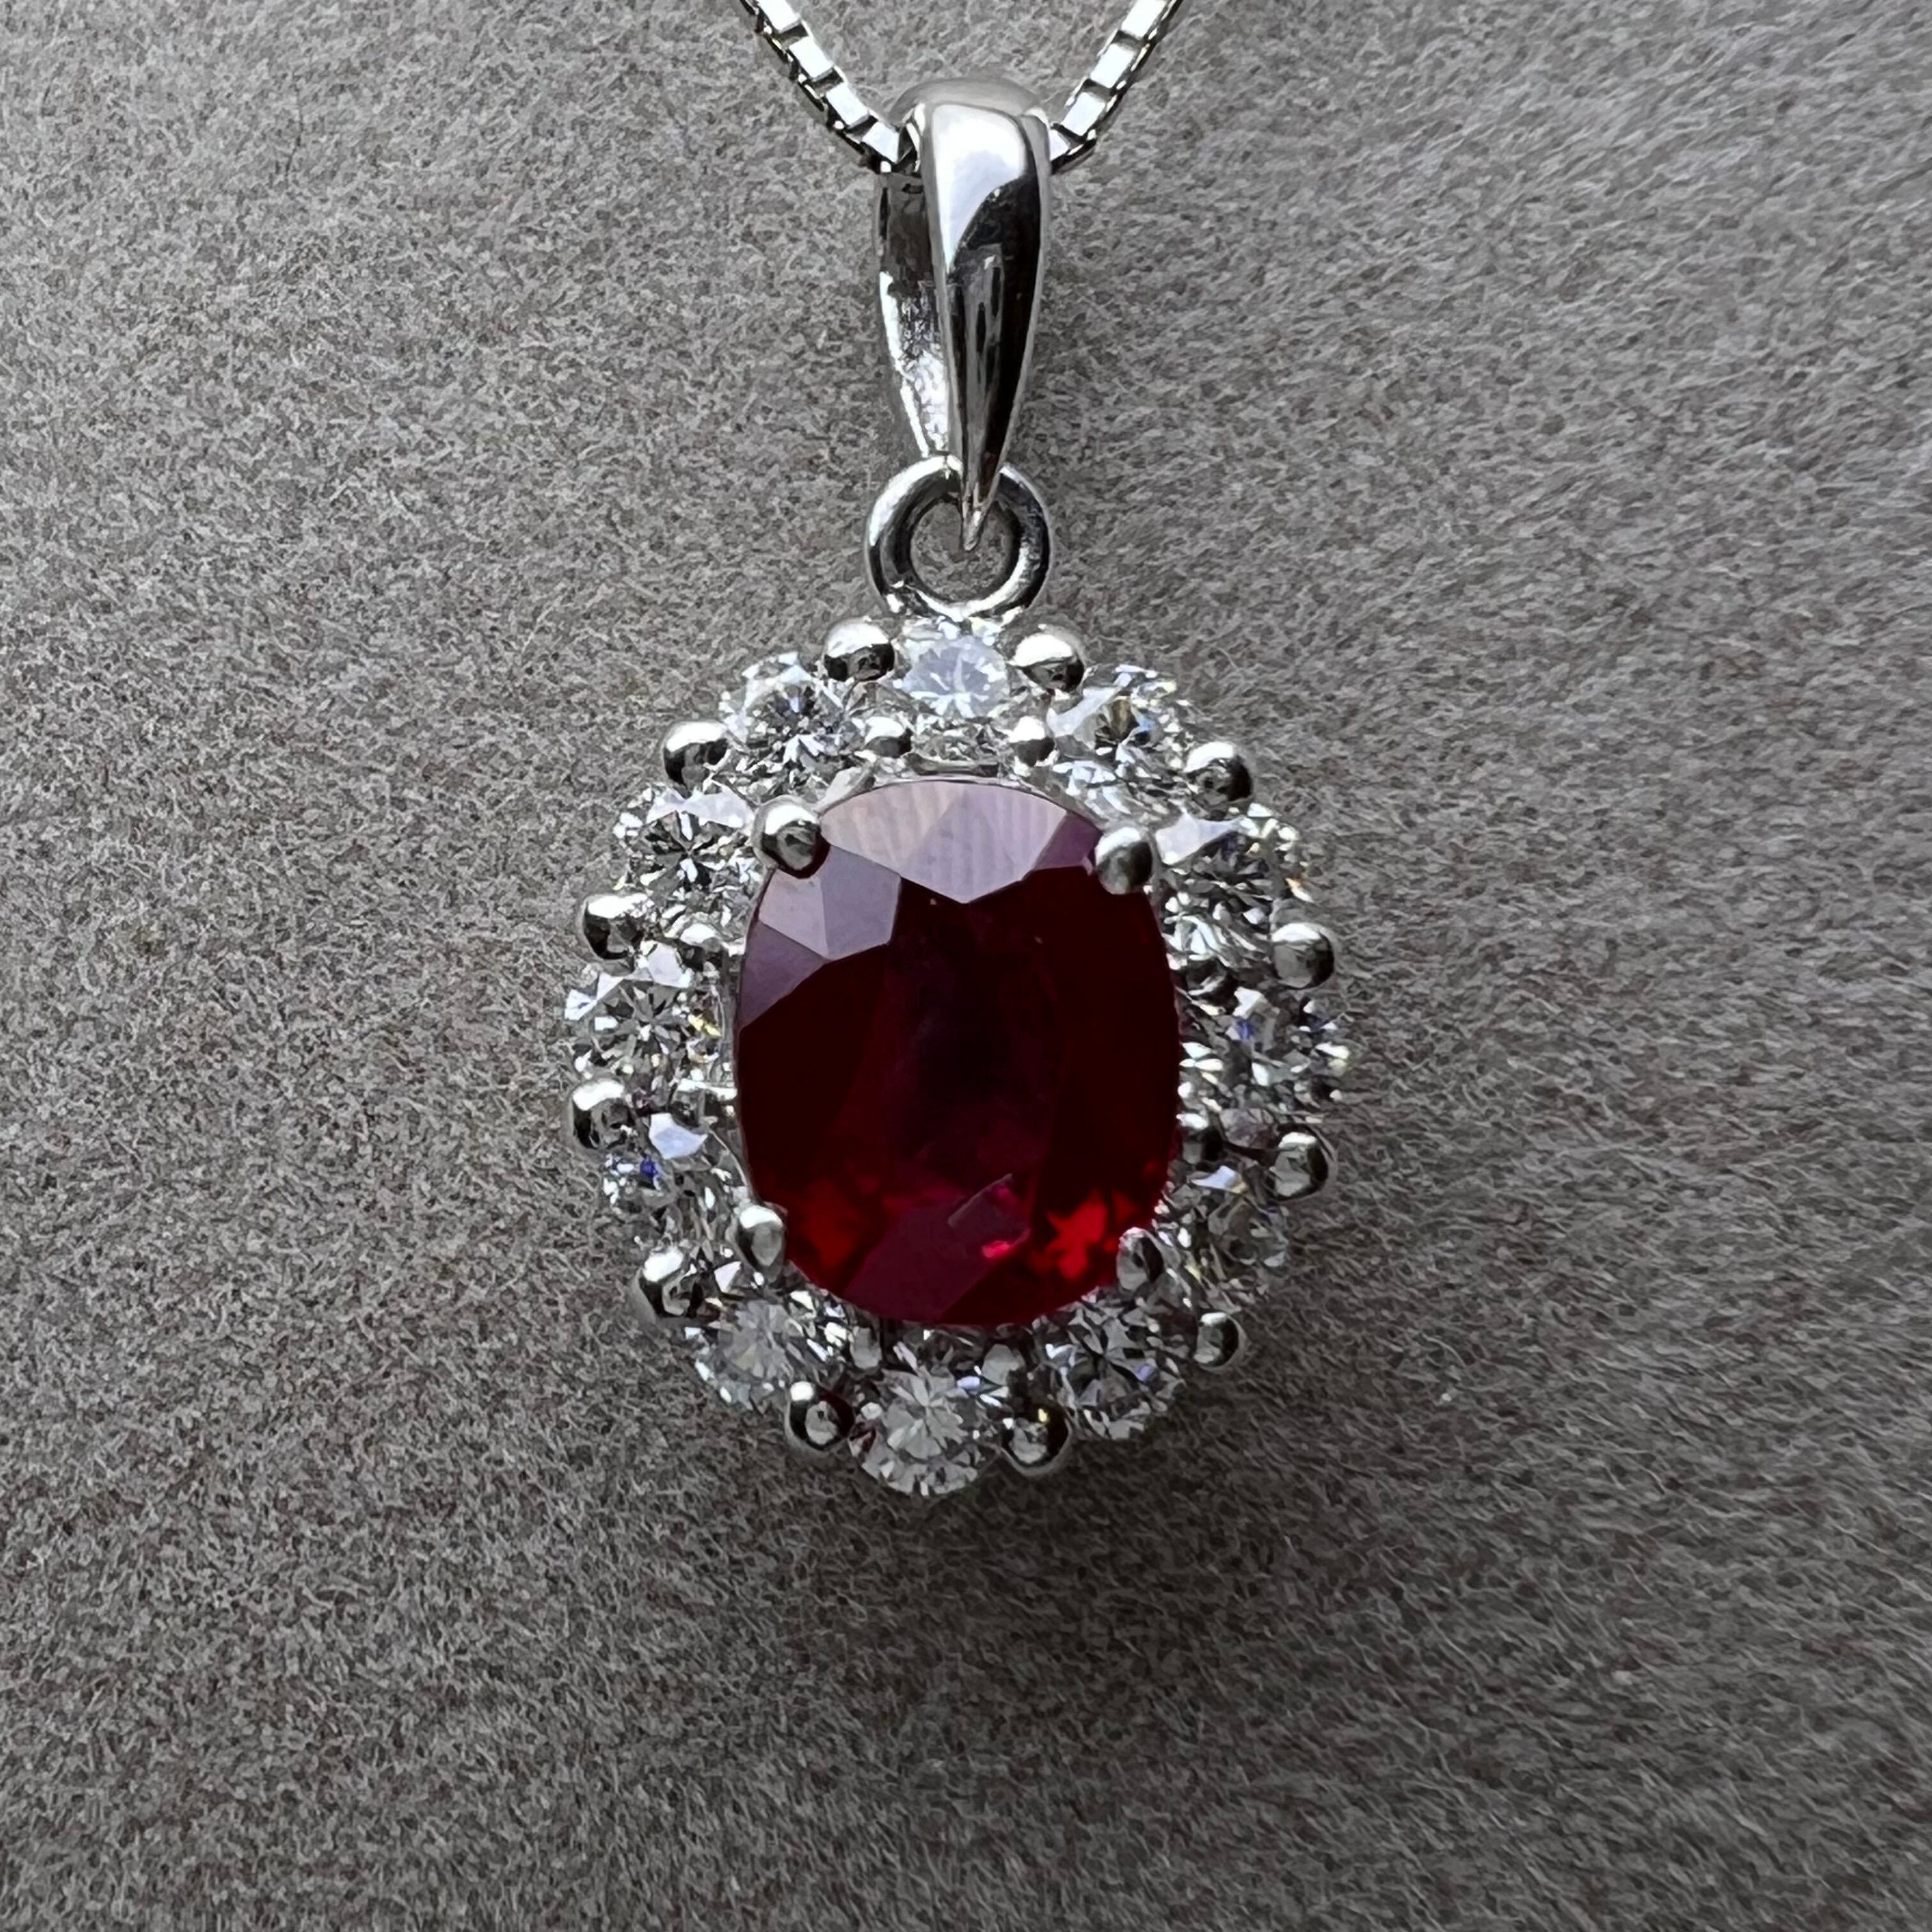 【GRS鑑別】PT900ビルマ産ピジョンブラッドルビー 1.51ct D 0.67ct ネックレス used jewelry GRS鑑別書付き |  鈴木屋 powered by BASE